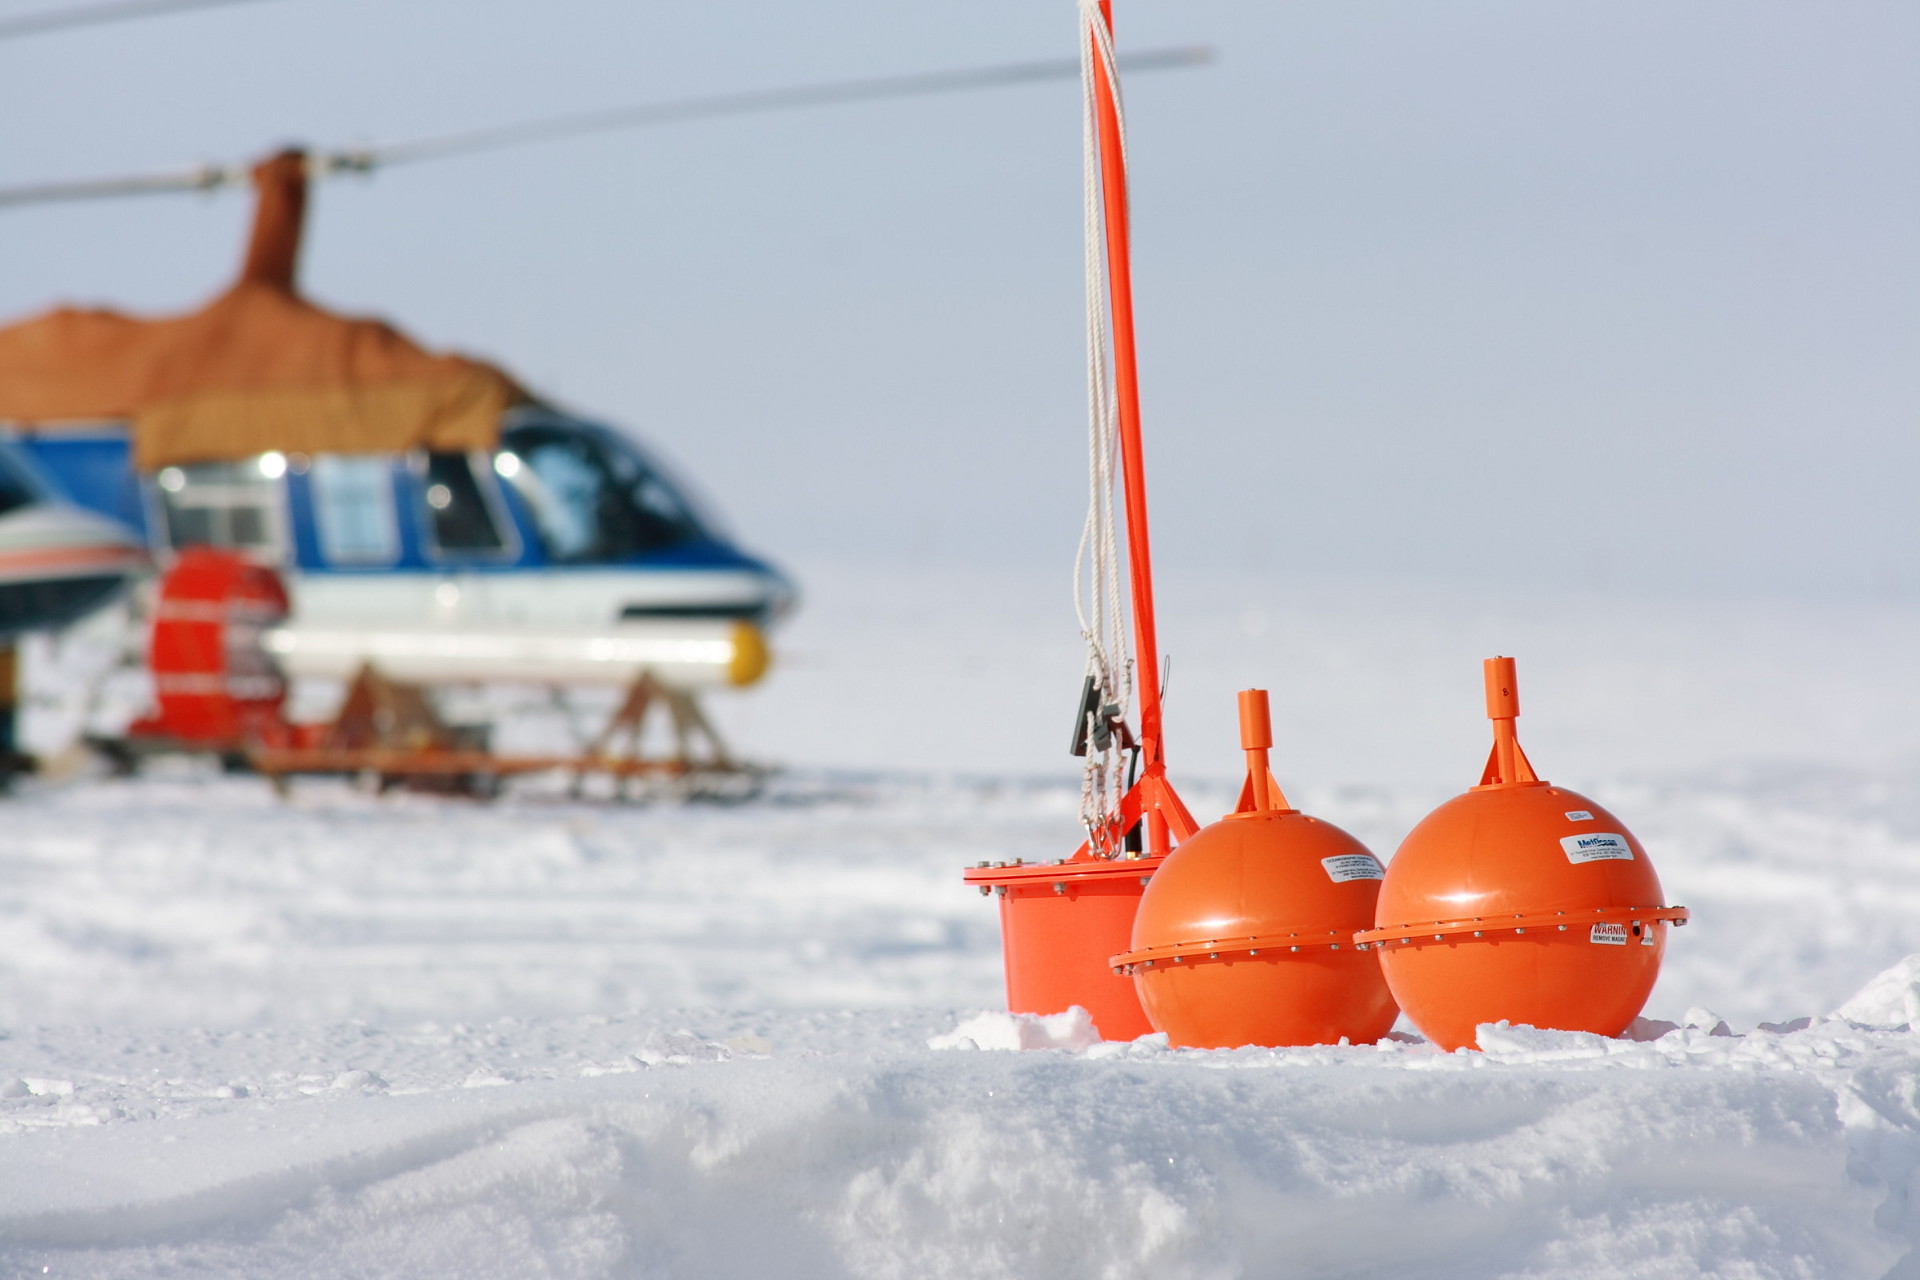 Sea-ice buoy expedition with helicopter in background